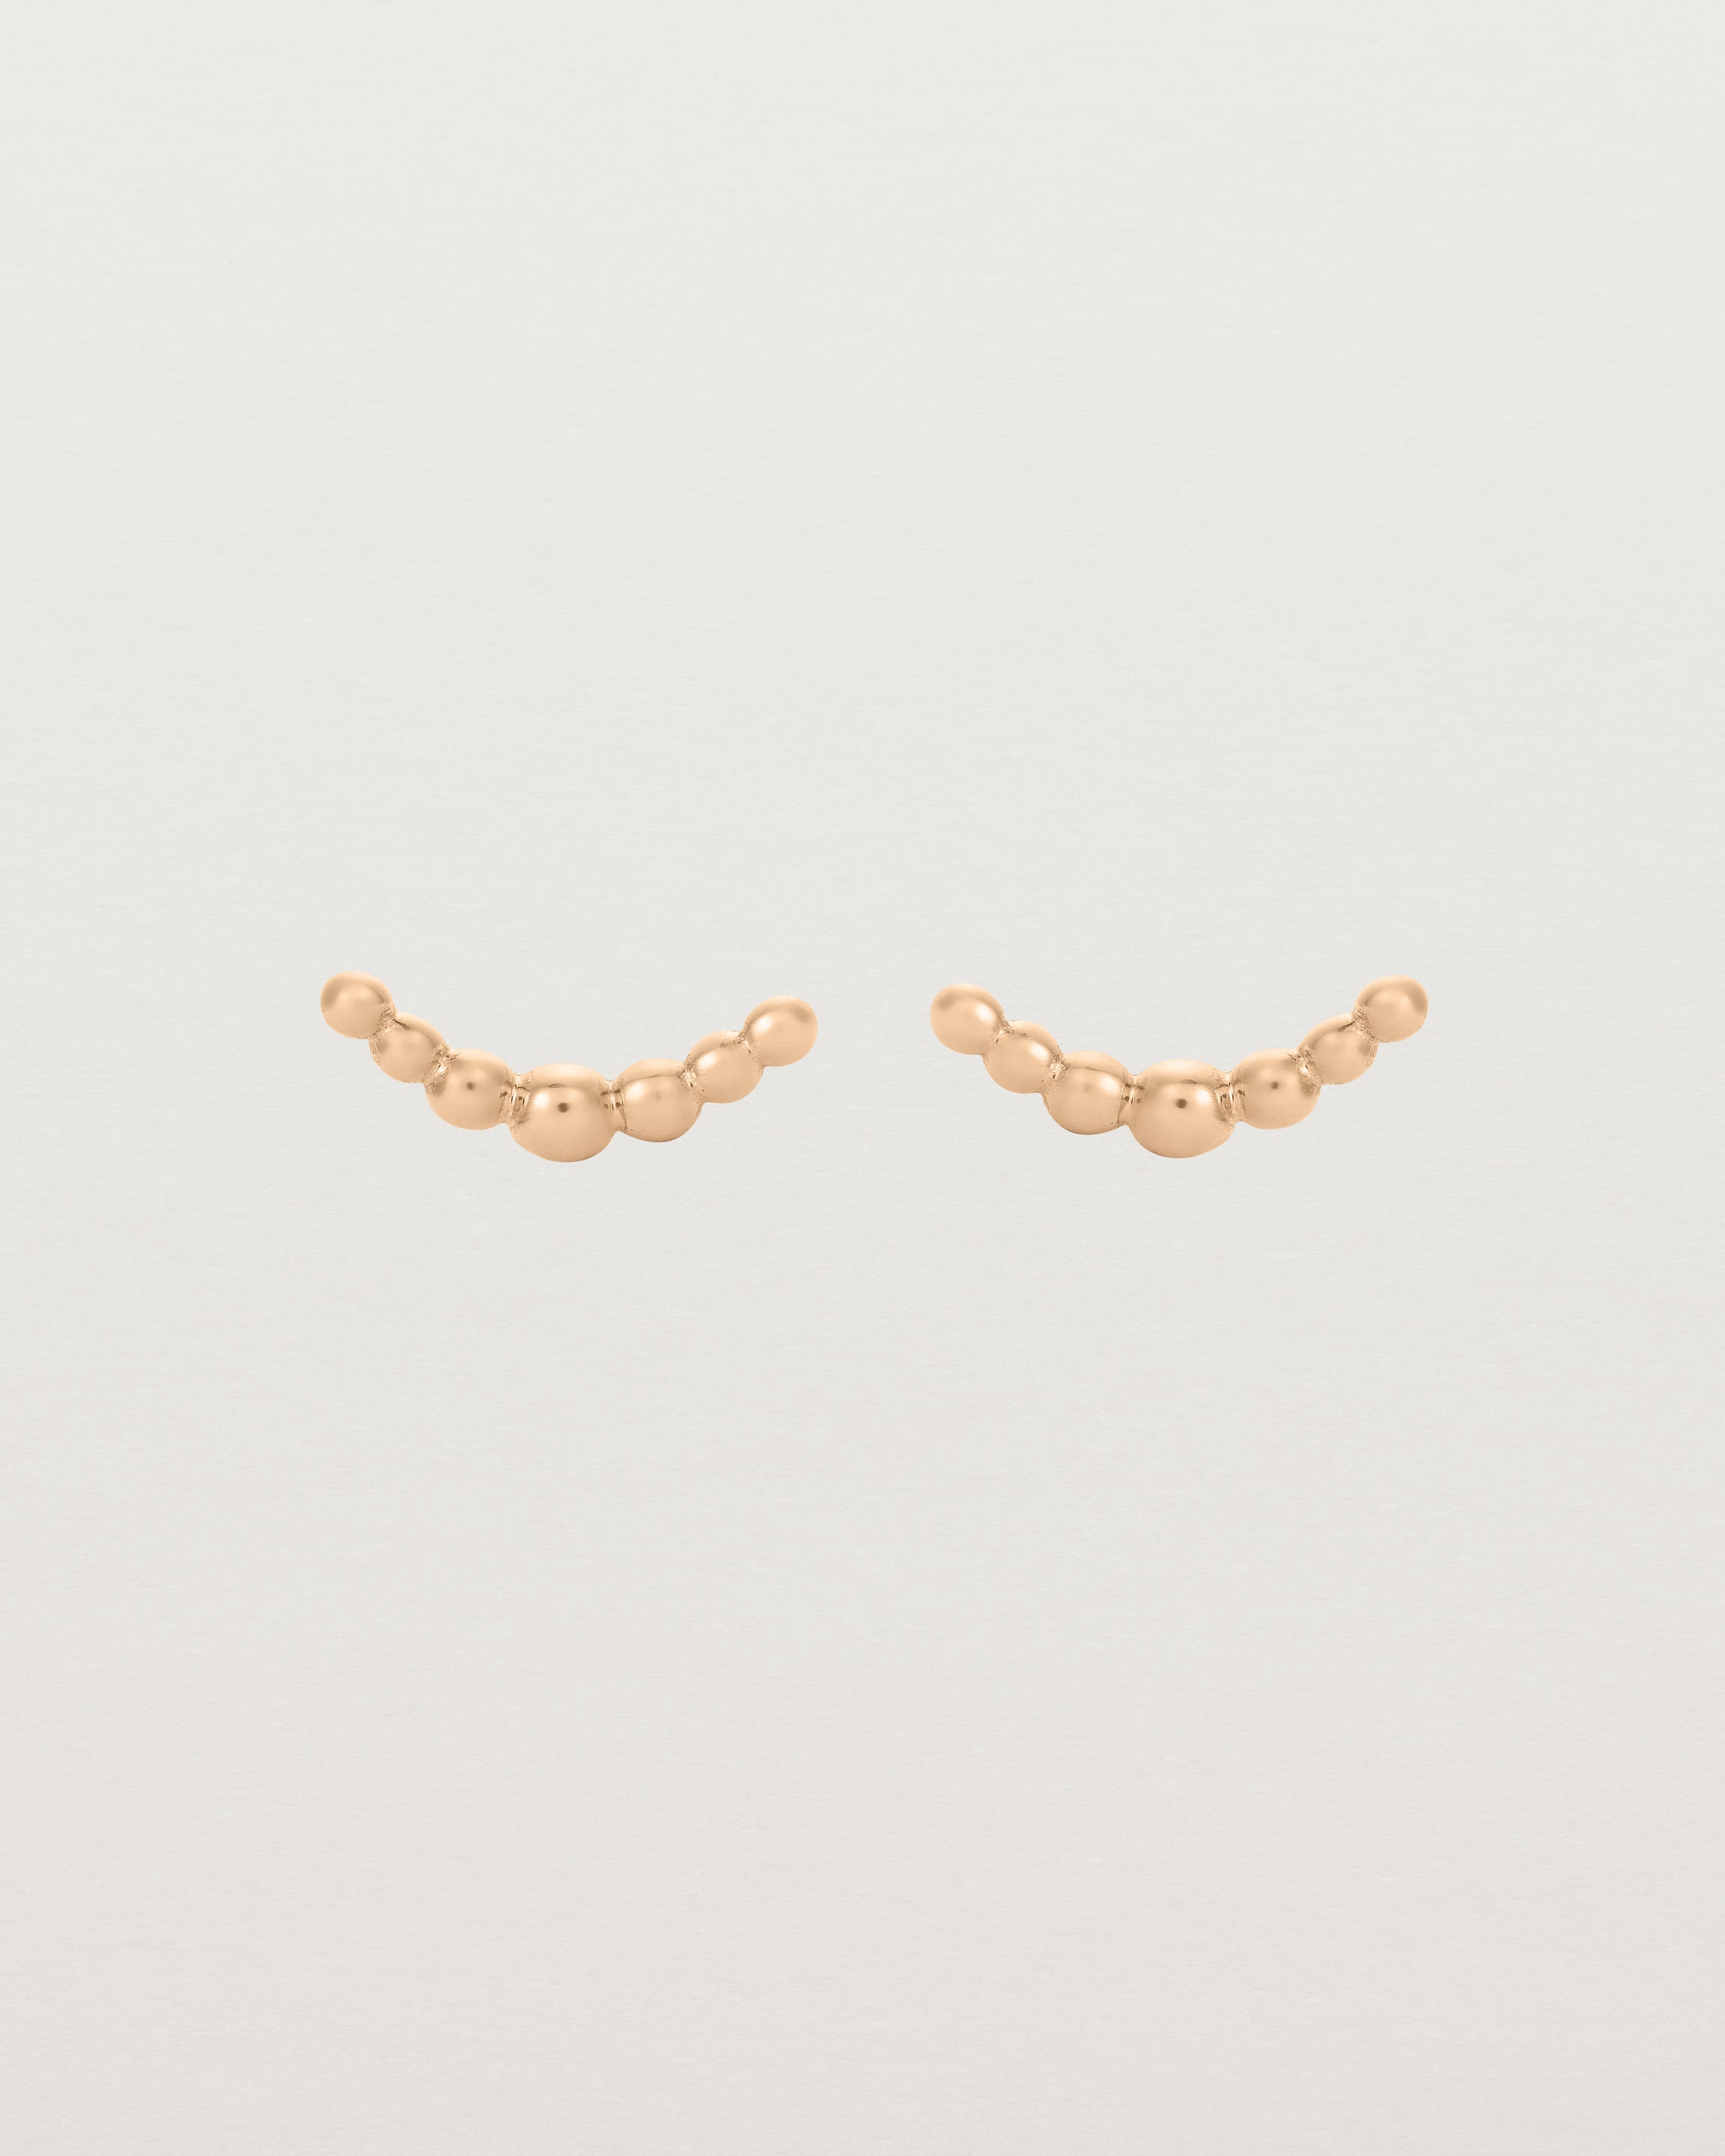 A pair of rose gold studs featuring an arc of round metal balls